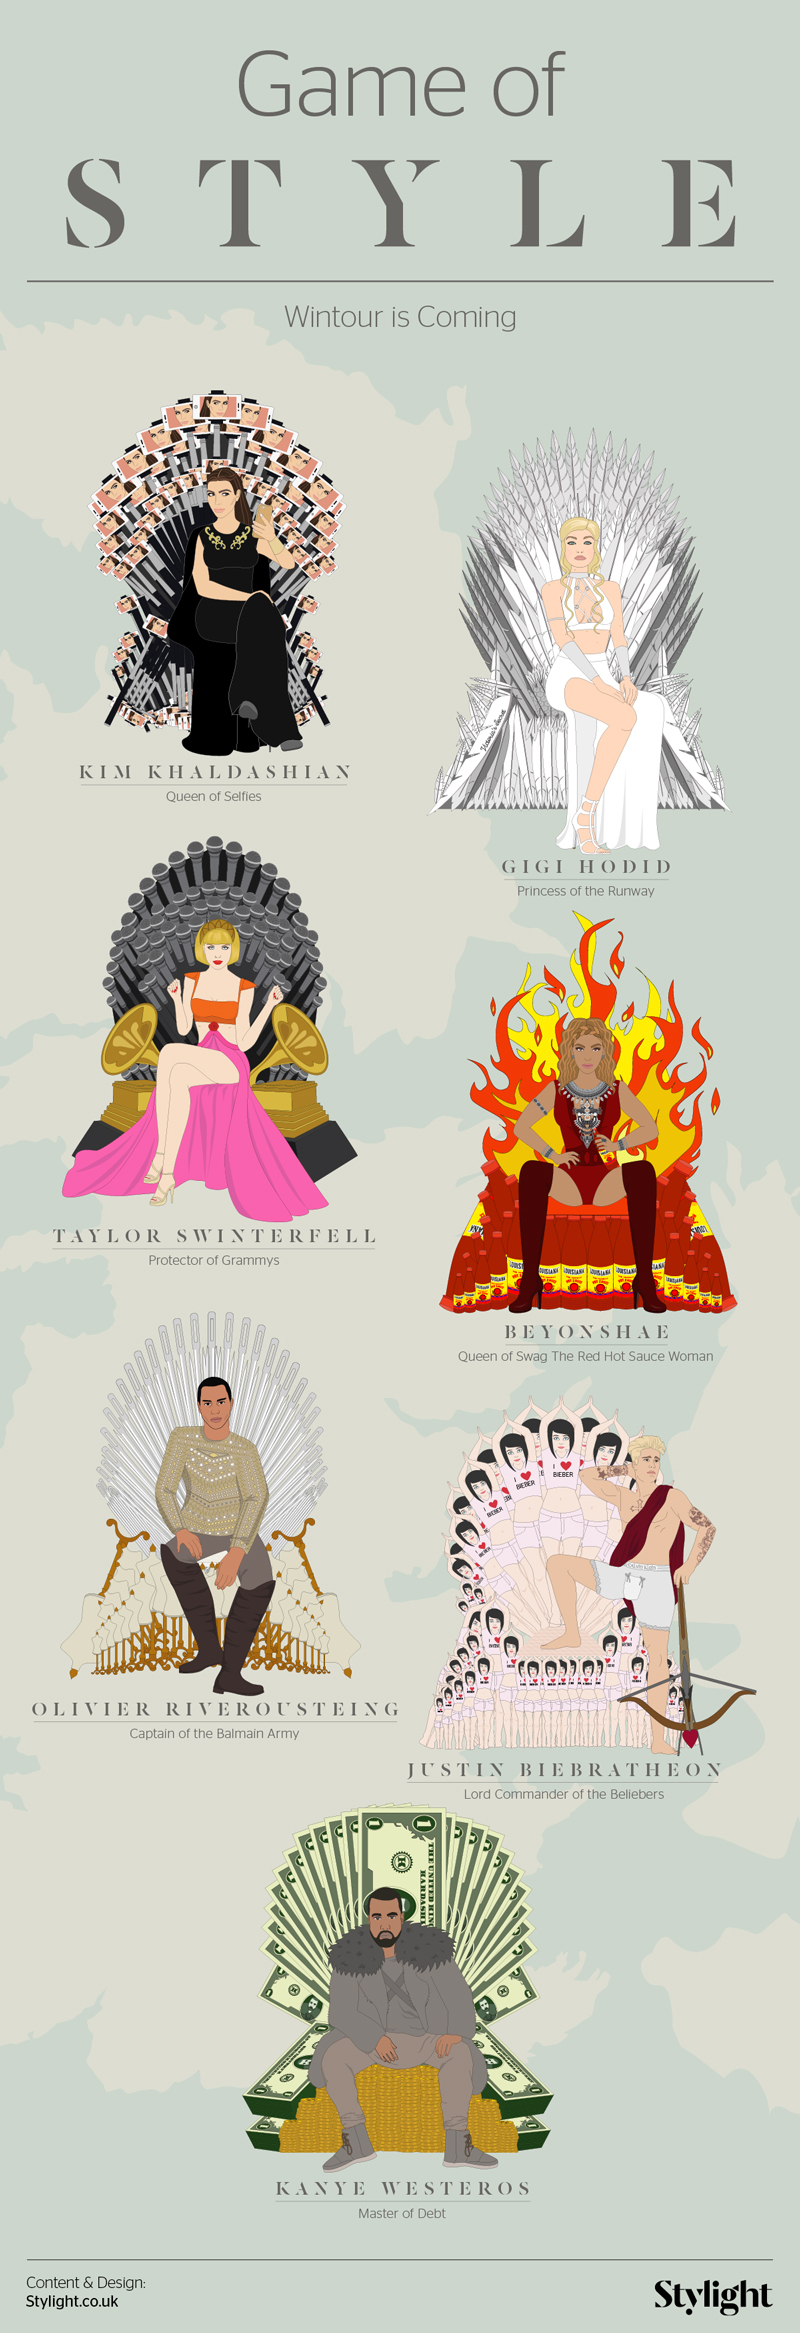 Game of Style Infographic